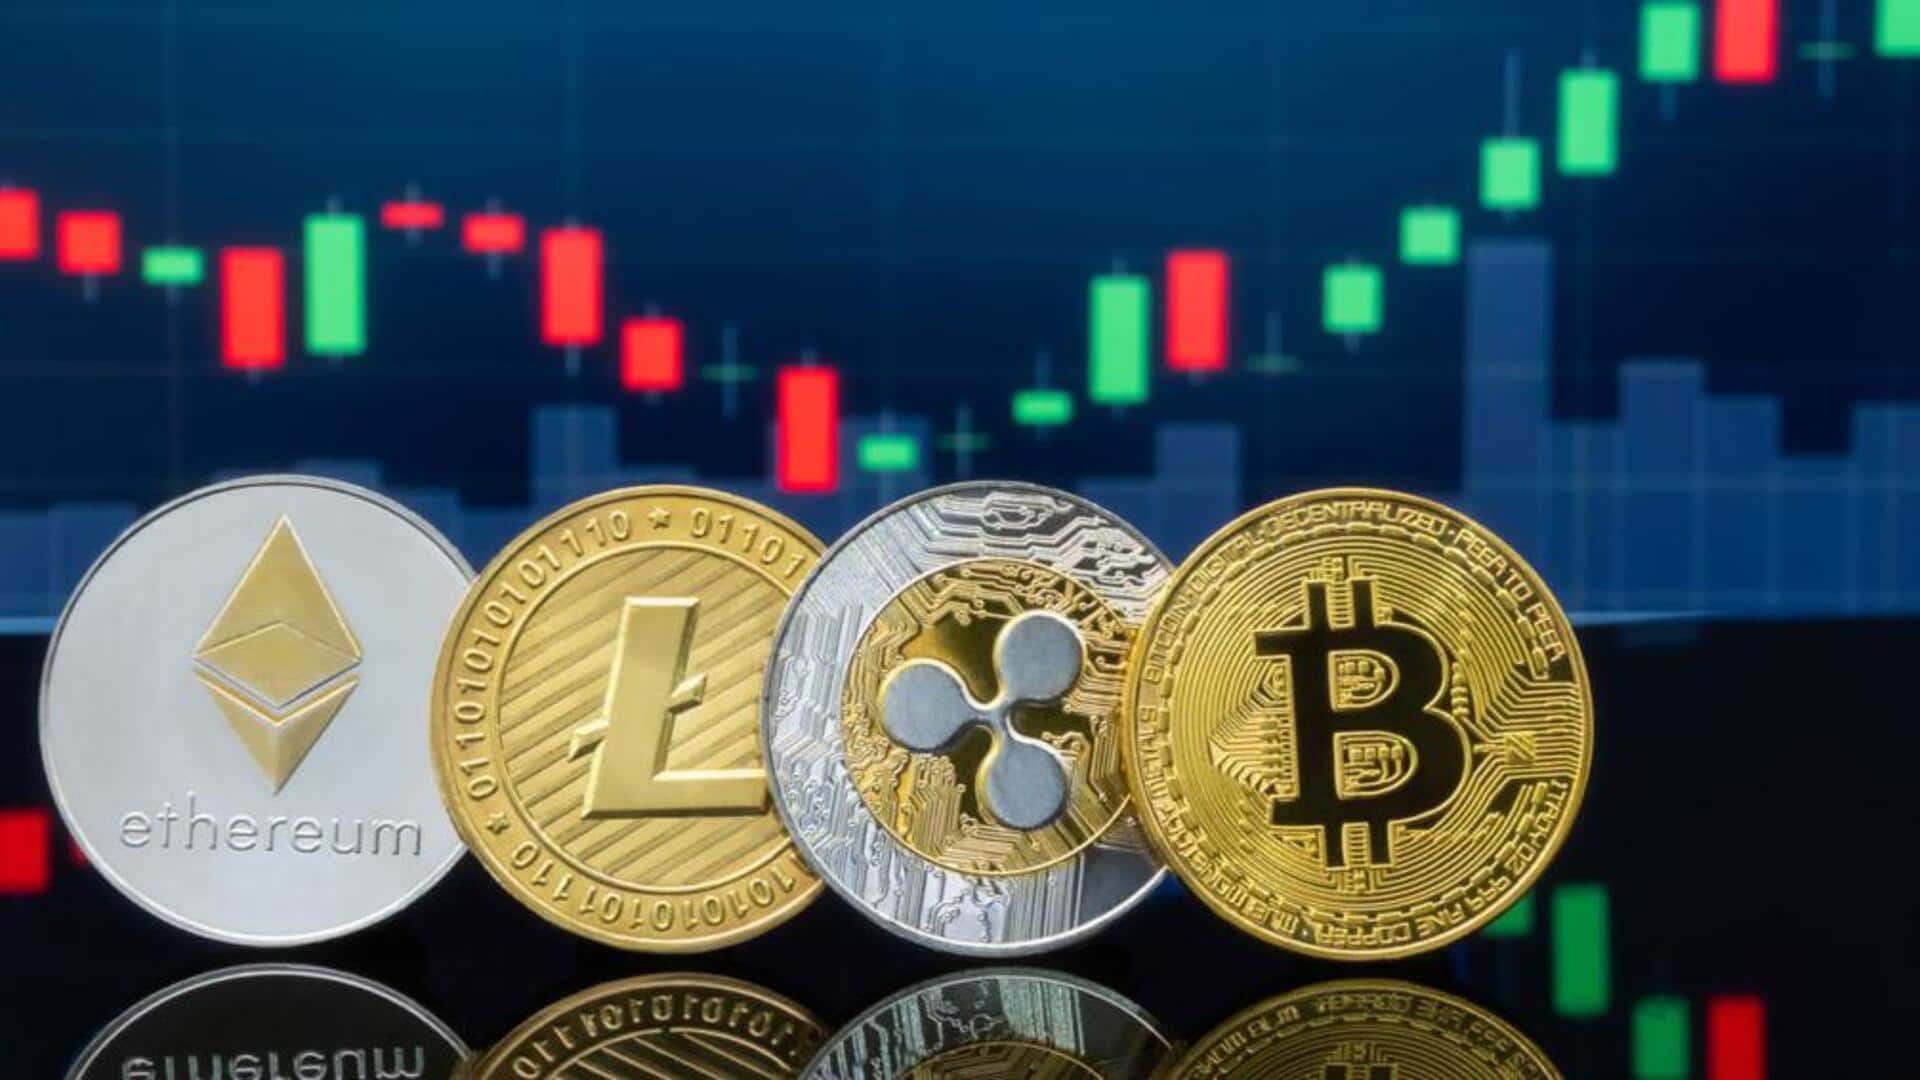 Cryptocurrency prices today: Check rates of Bitcoin, Cardano, Solana, Tether